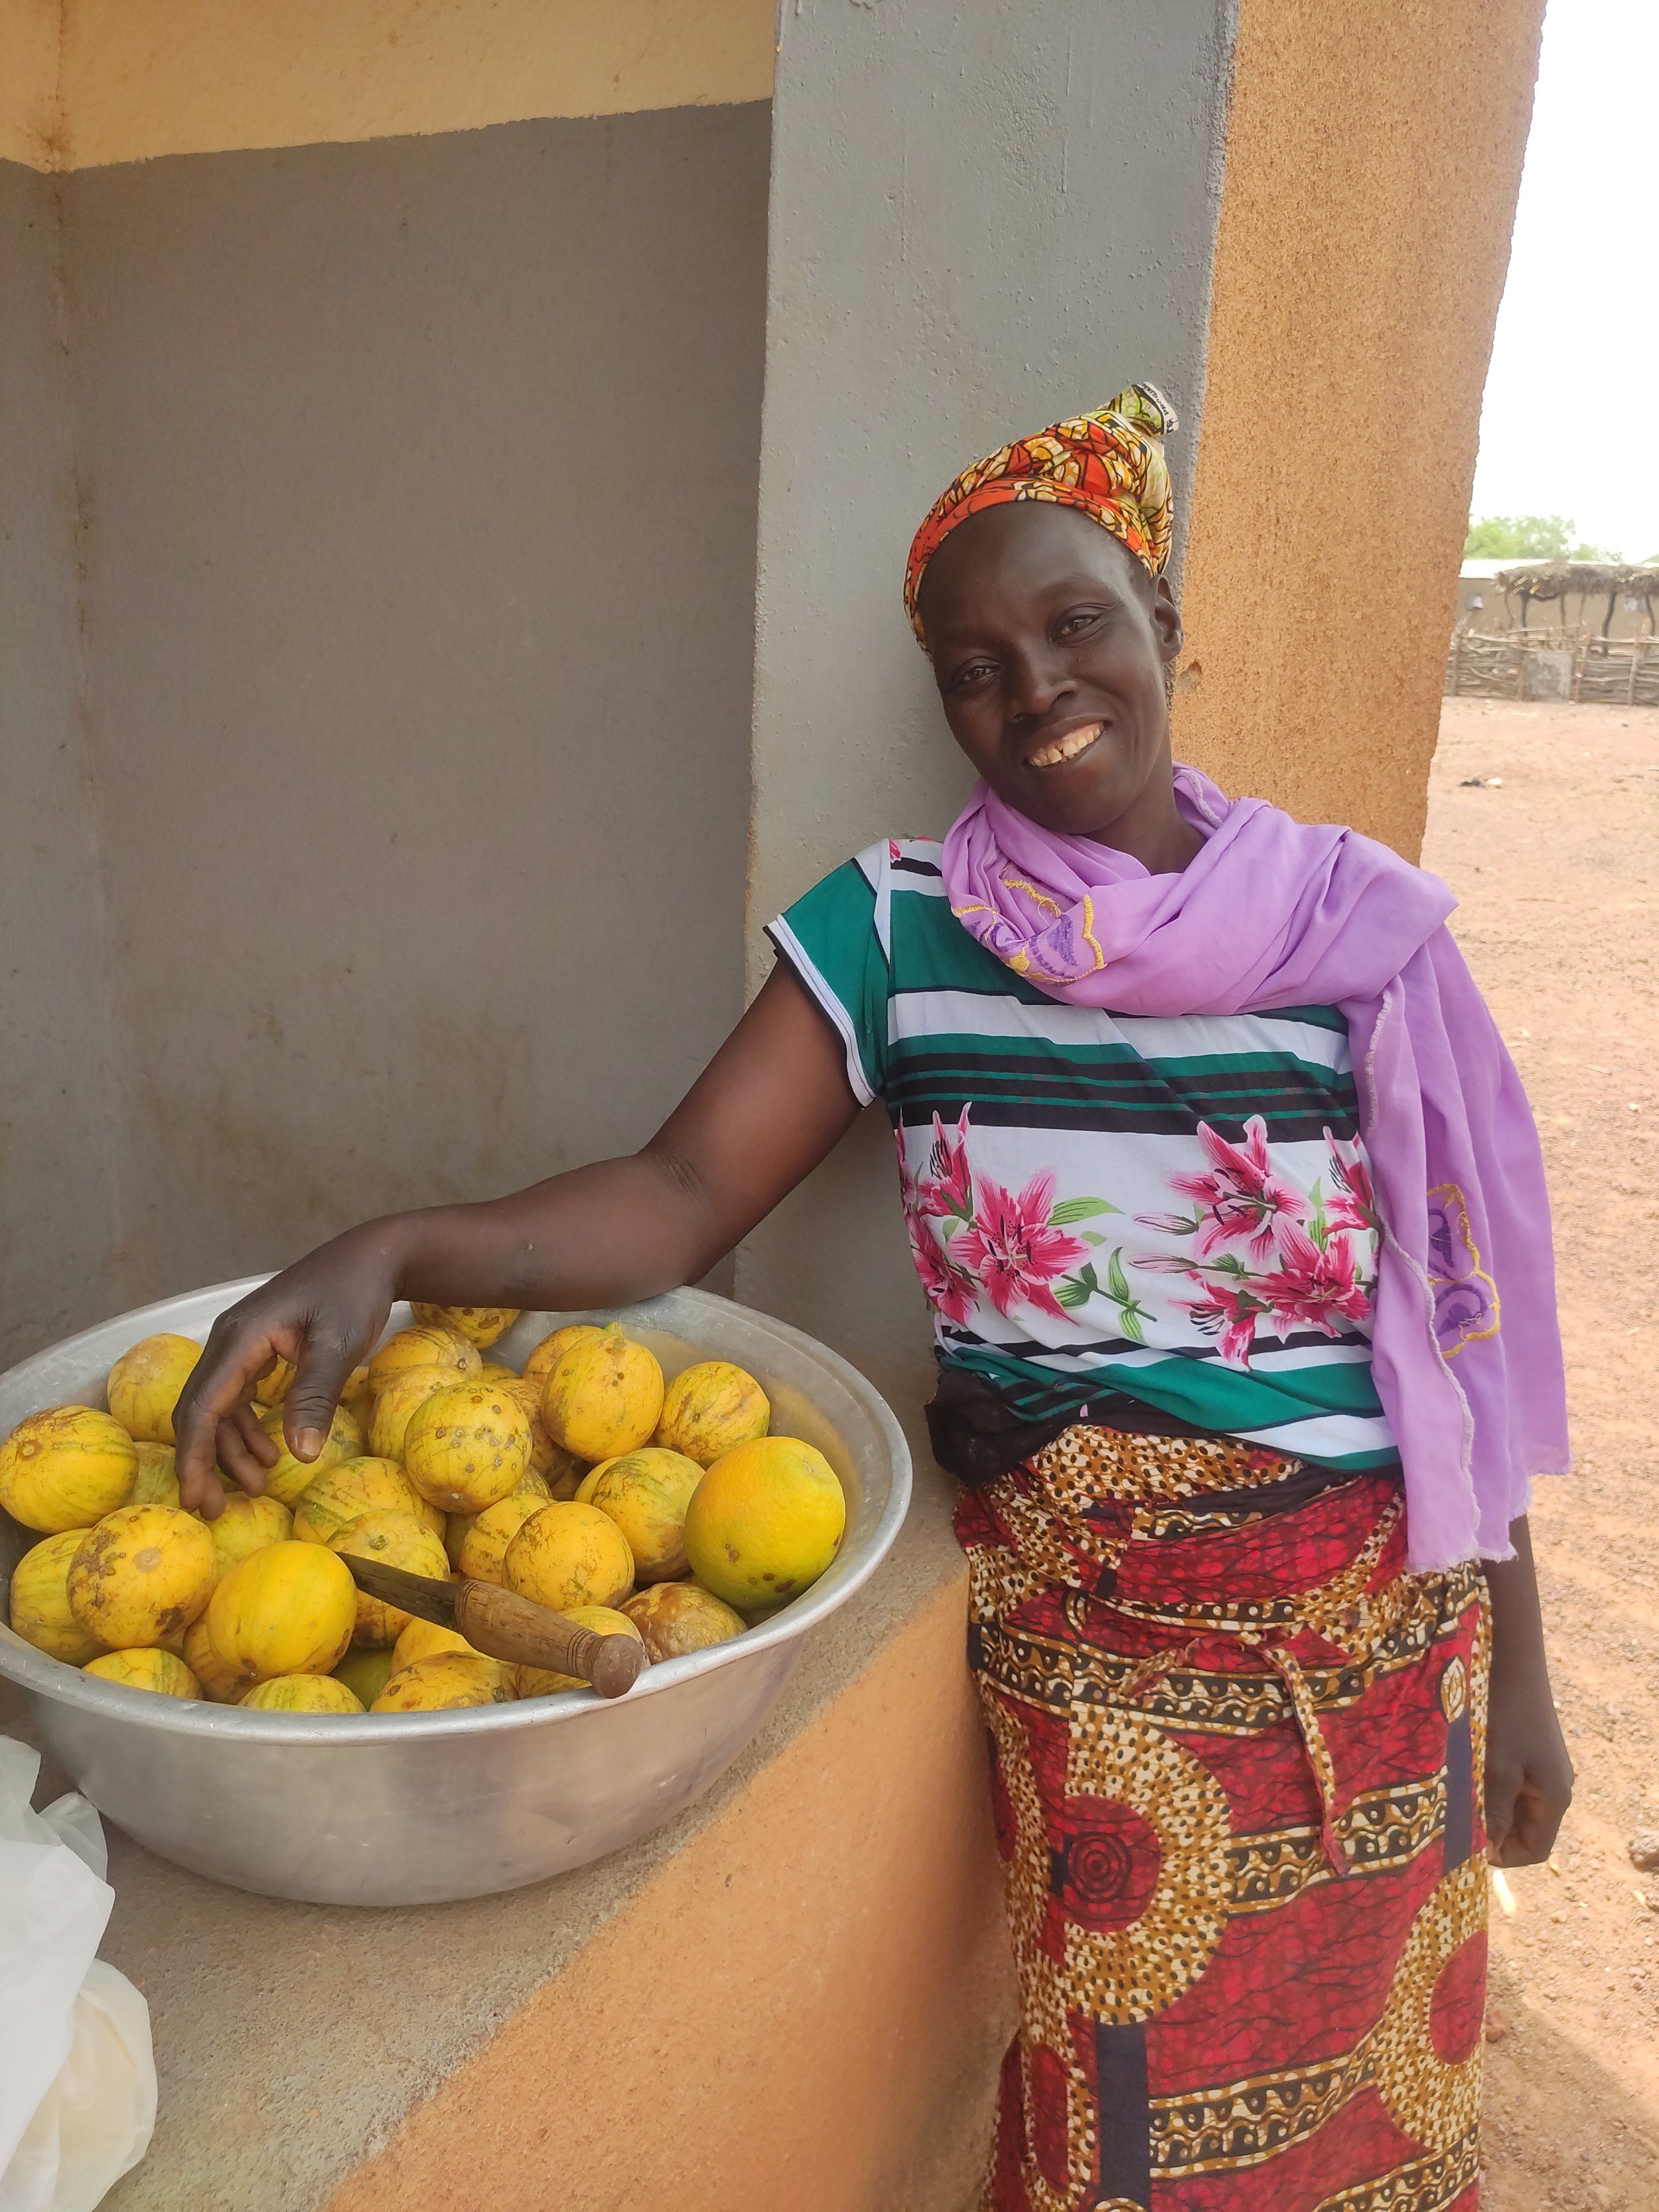 Bintou shows of the fruit she imports using her Mothers' Loan Fund capital.